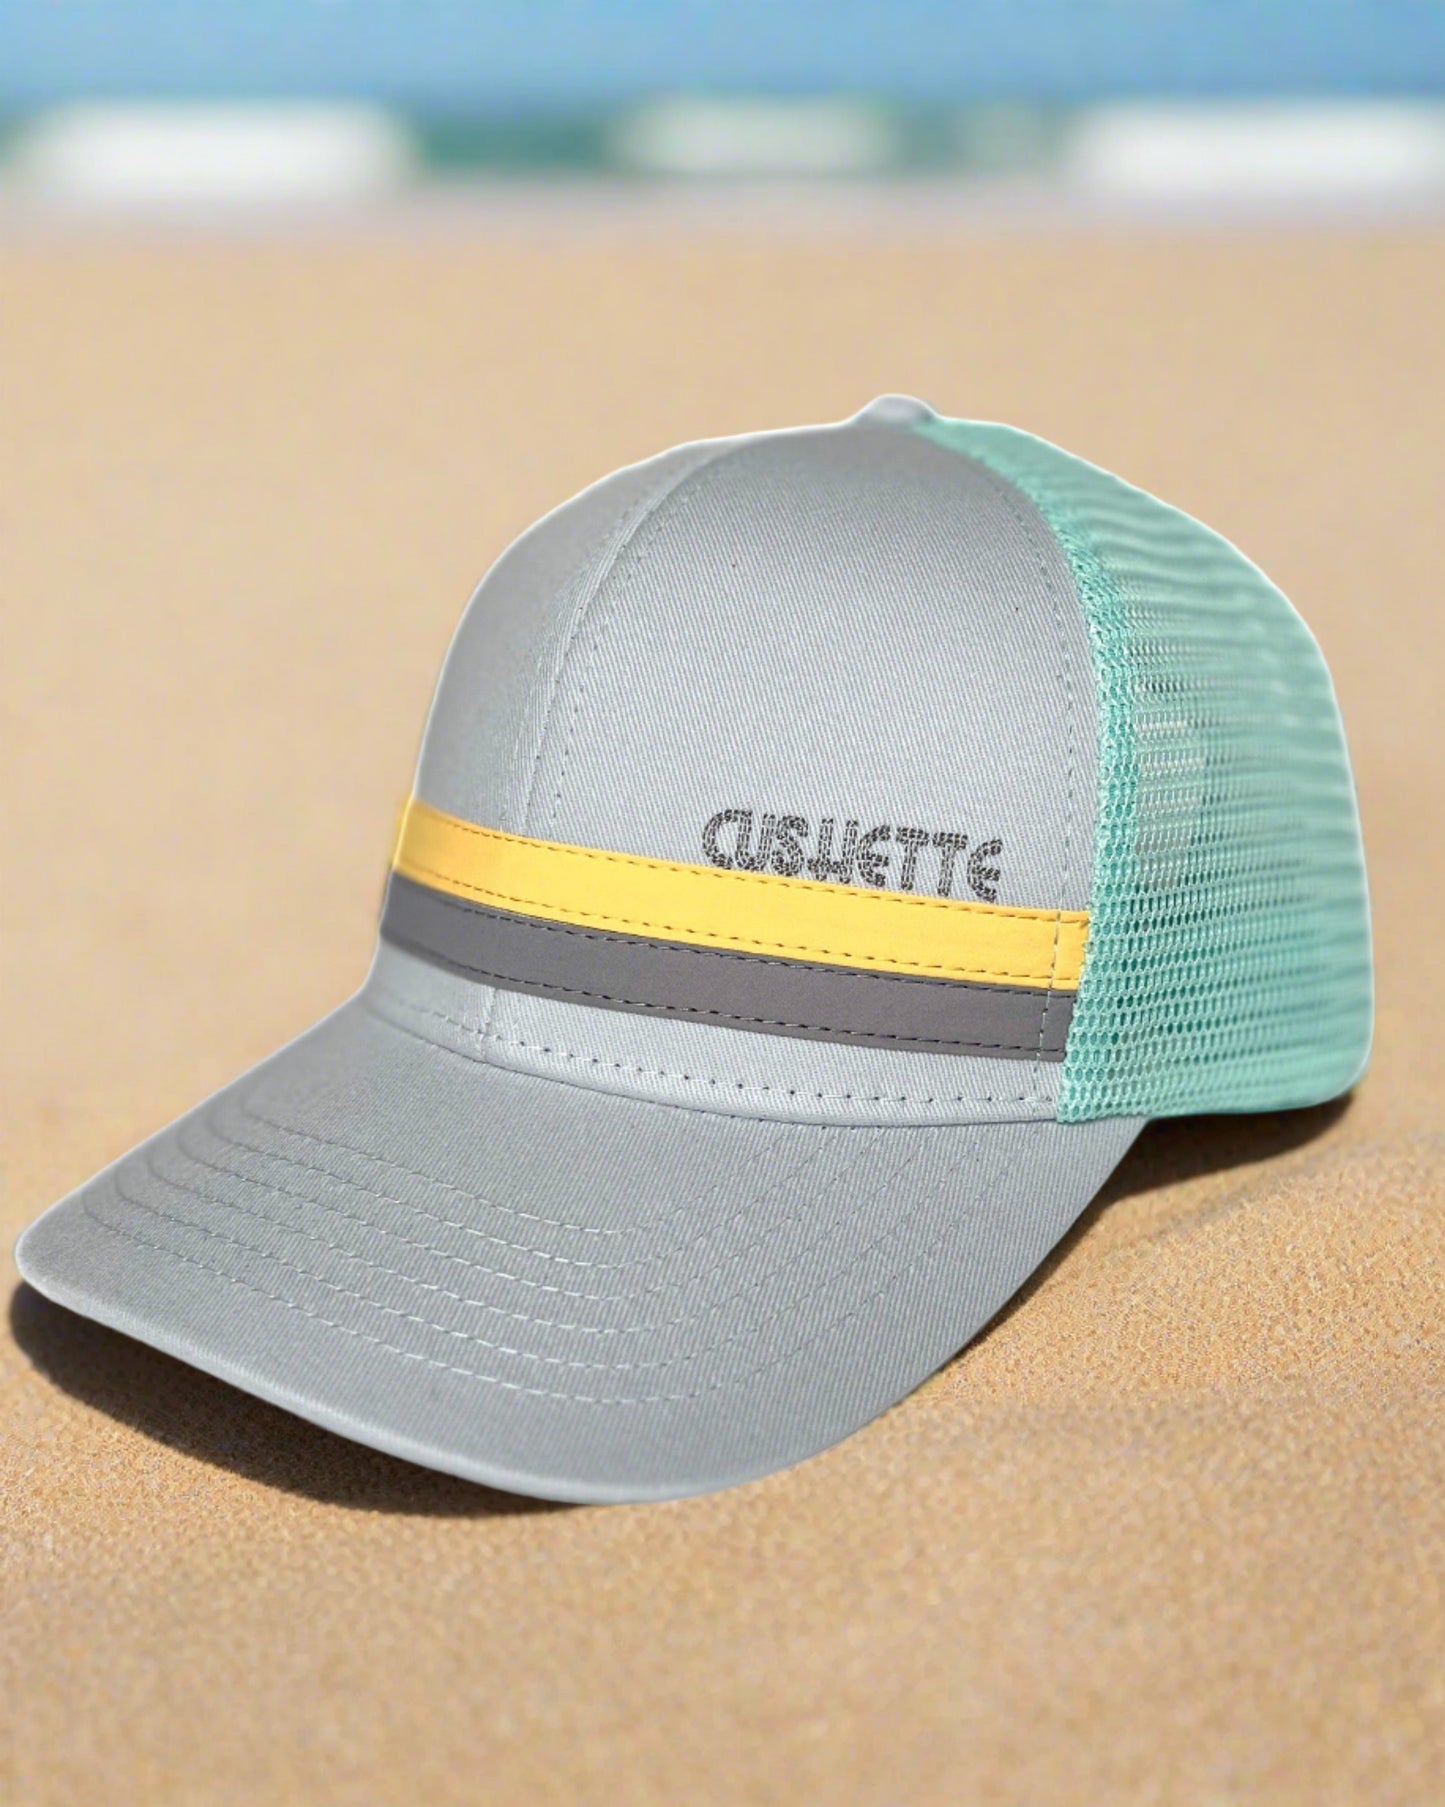 Gray and turquoise trucker hat